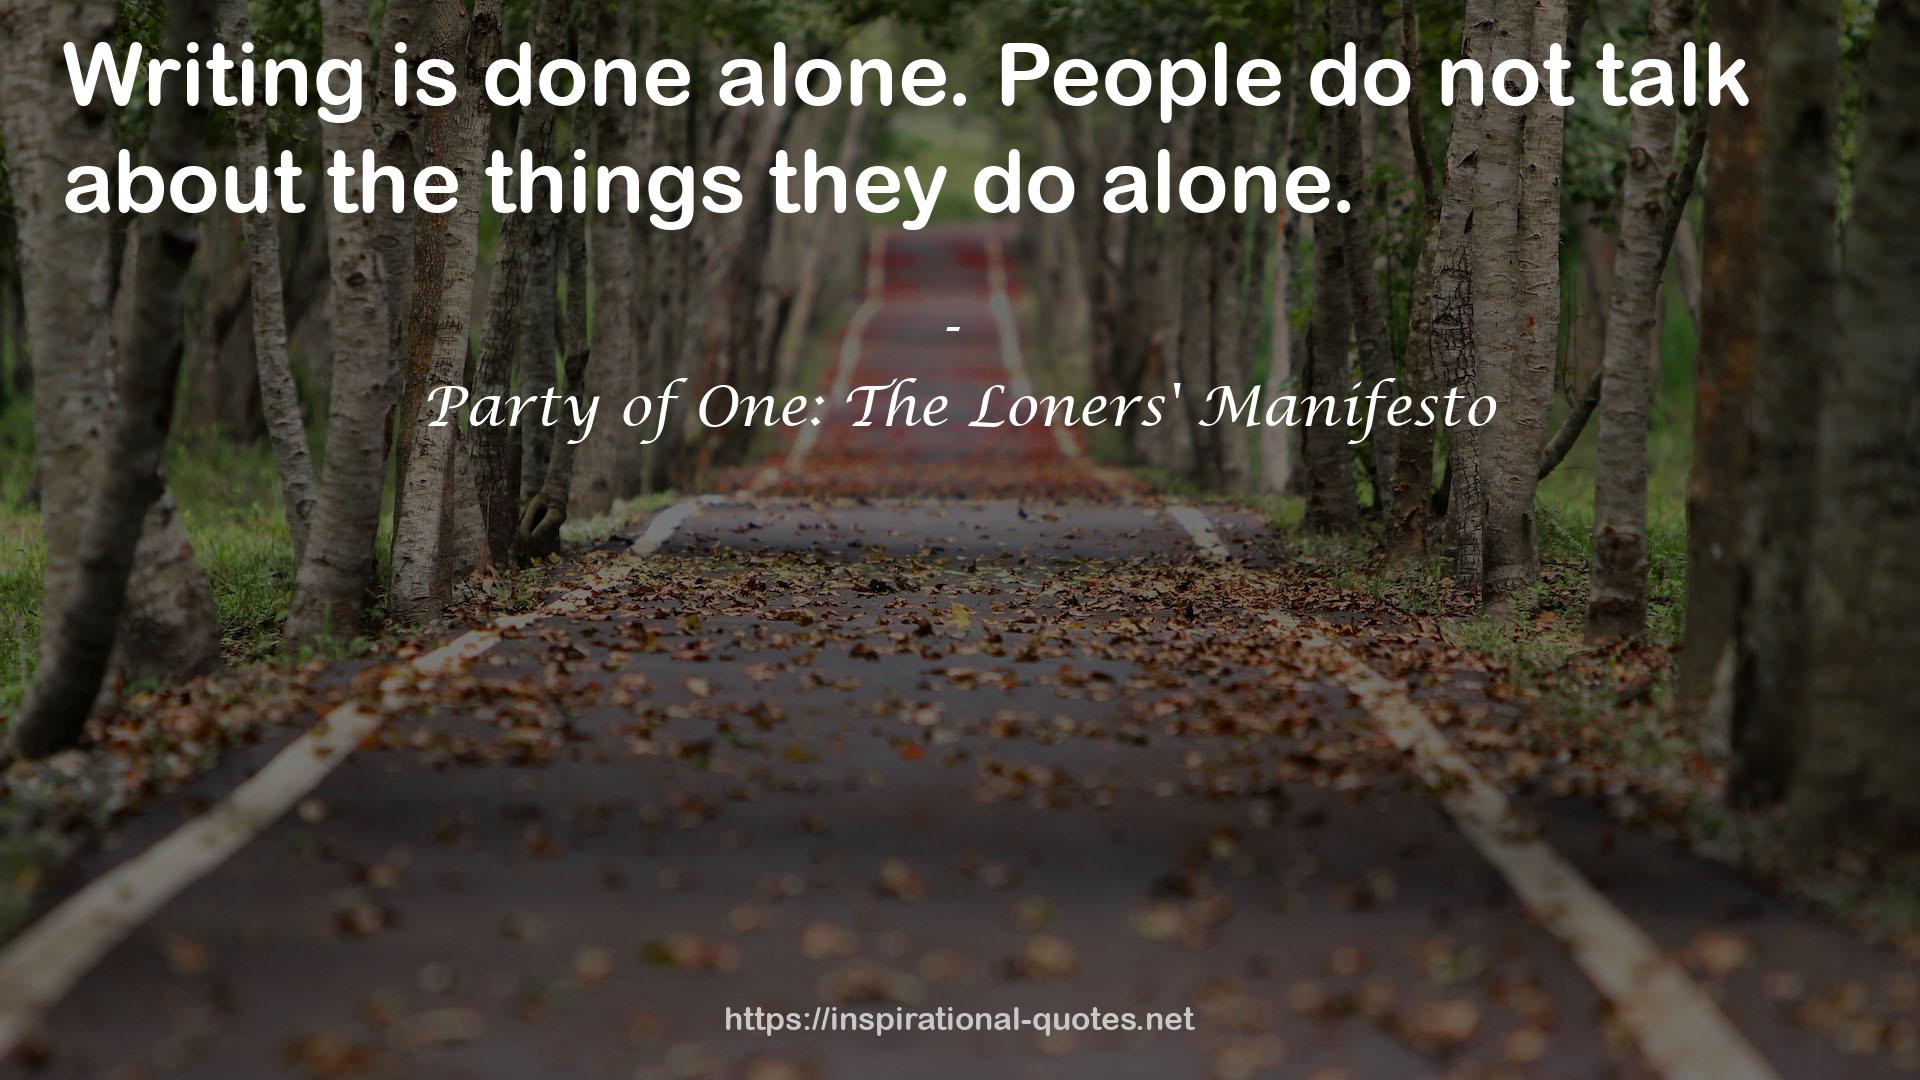 Party of One: The Loners' Manifesto QUOTES